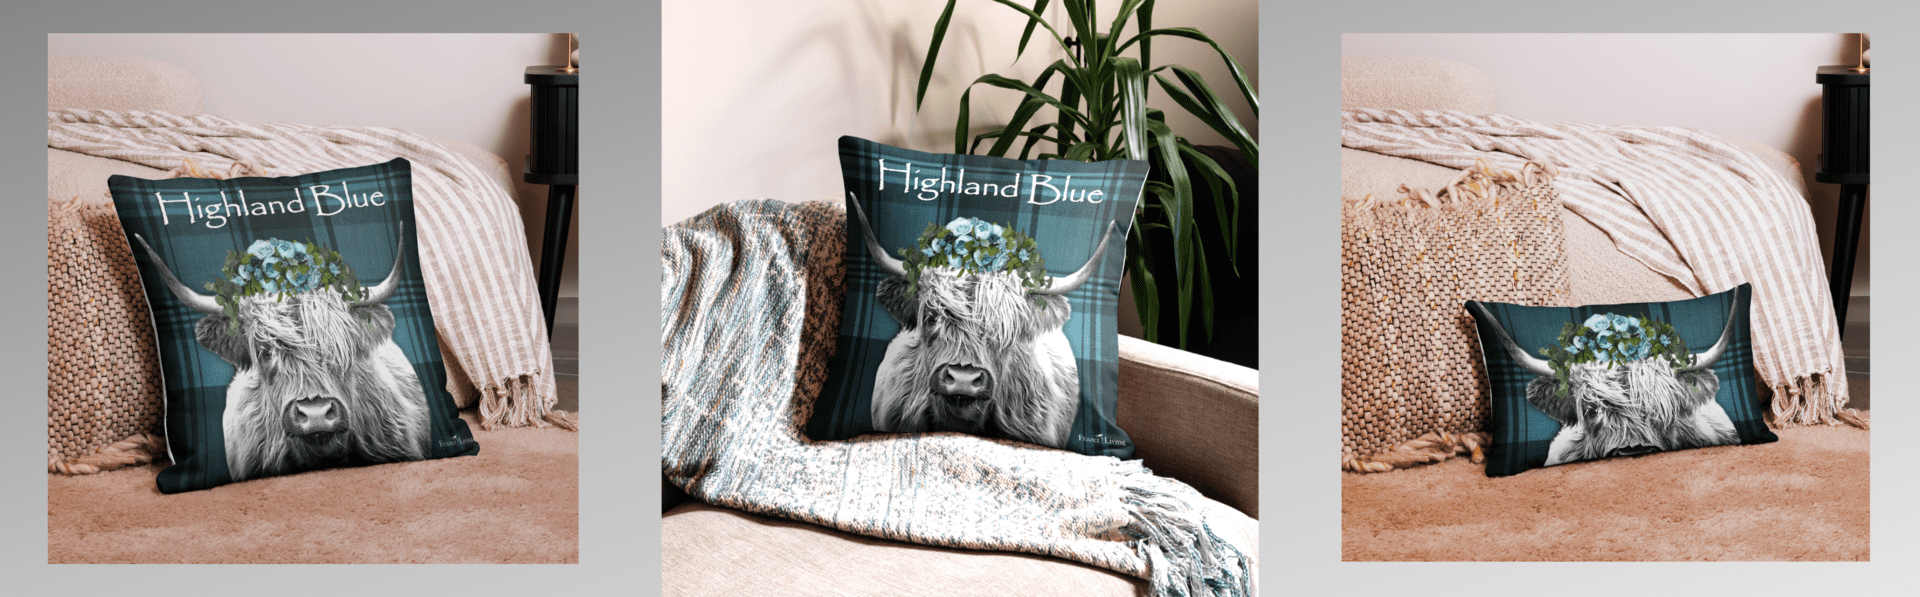 Highland cow pillow with blue flowers.